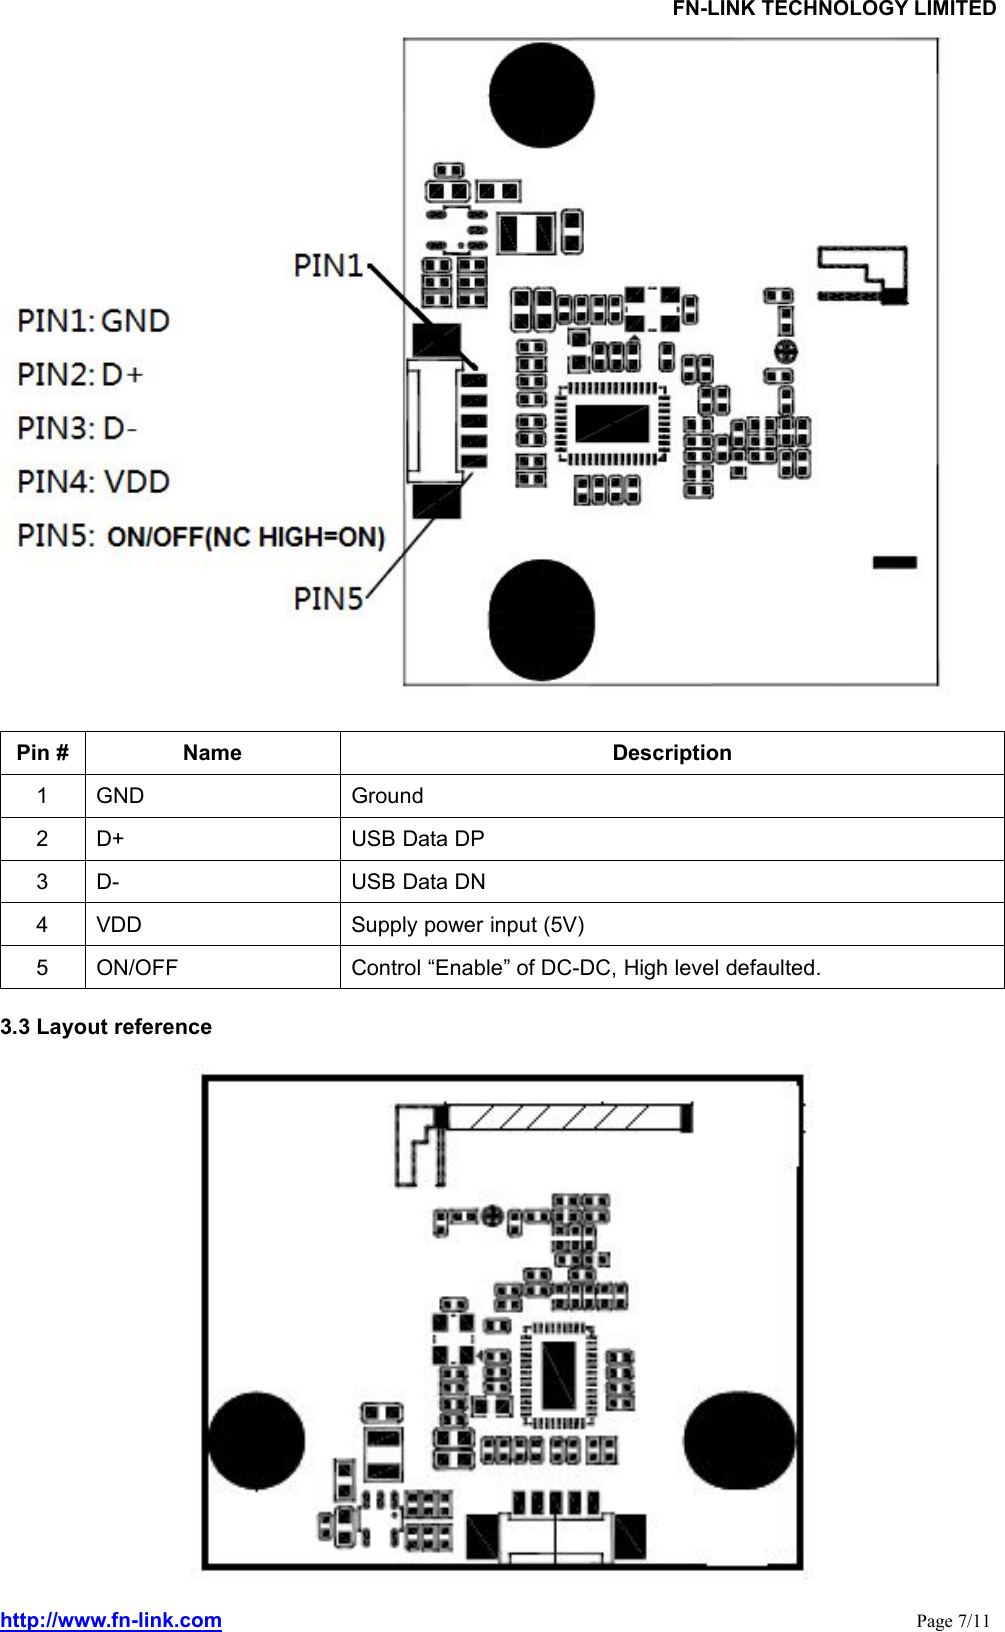 FN-LINK TECHNOLOGY LIMITEDhttp://www.fn-link.com Page 7/11Pin # Name Description1 GND Ground2 D+ USB Data DP3 D- USB Data DN4 VDD Supply power input (5V)5 ON/OFF Control “Enable” of DC-DC, High level defaulted.3.3 Layout reference